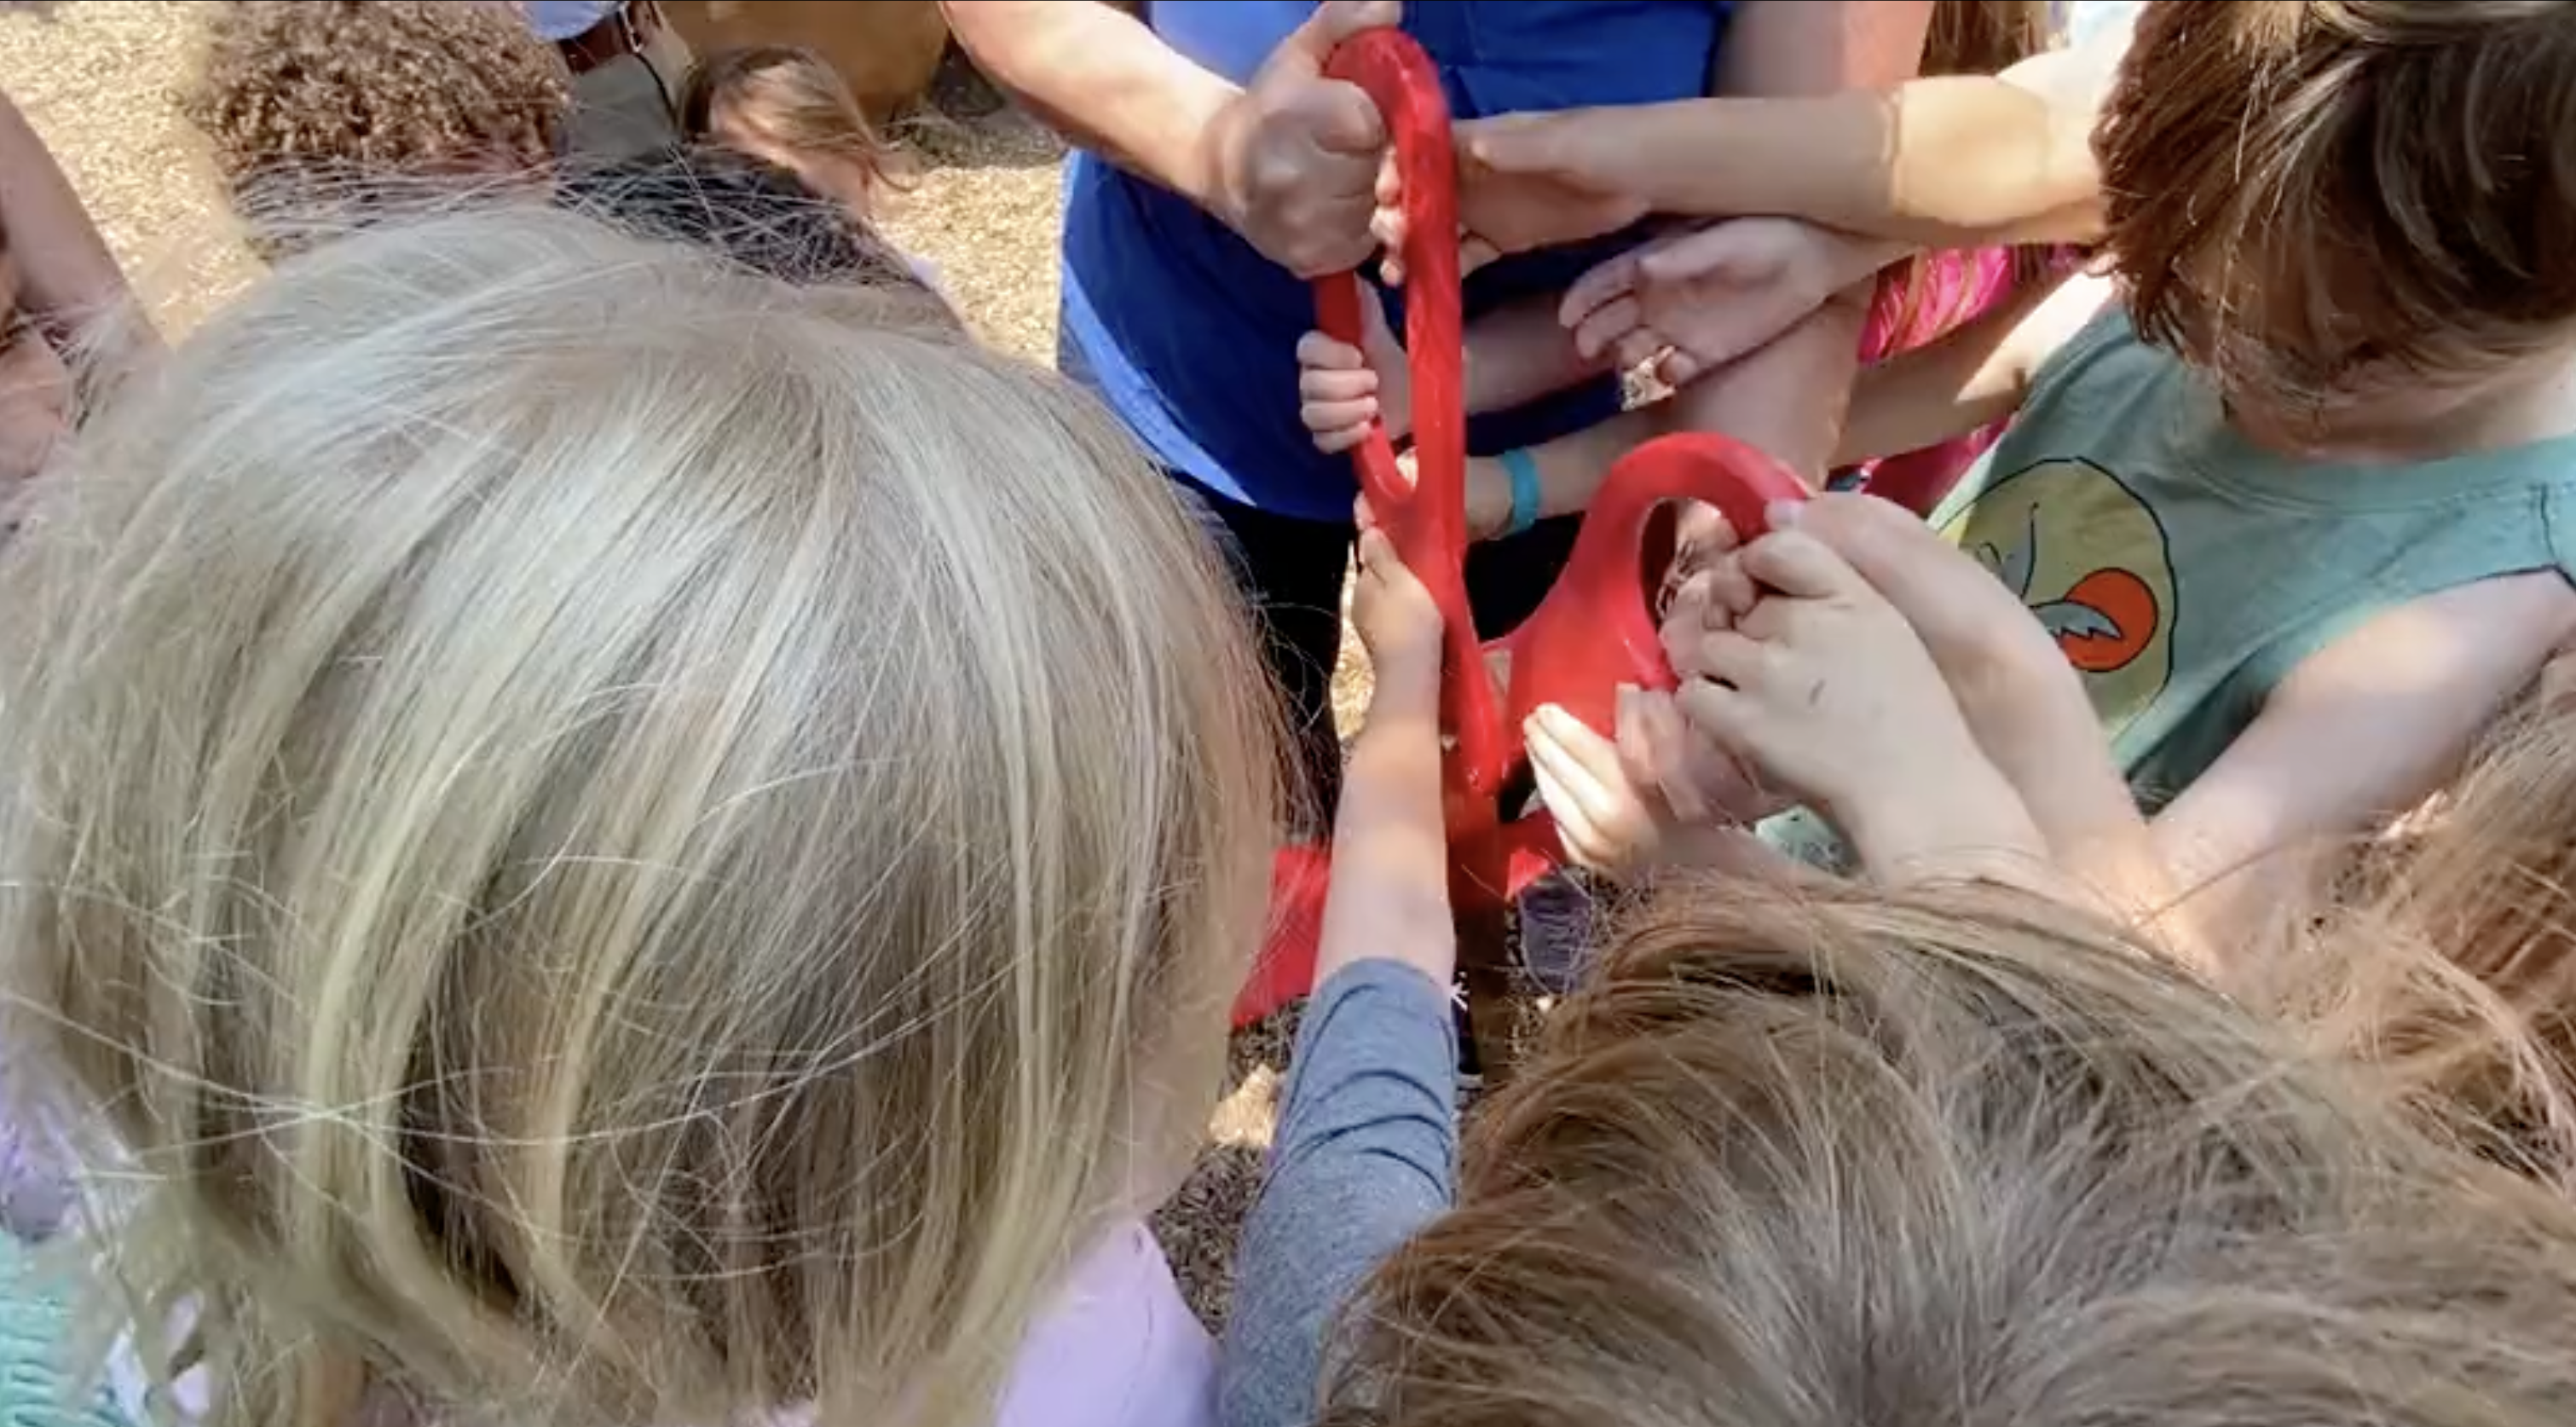 Close up from above of three young kids plus an adult holding oversized scissors with big red handles to cut a large ribbon.